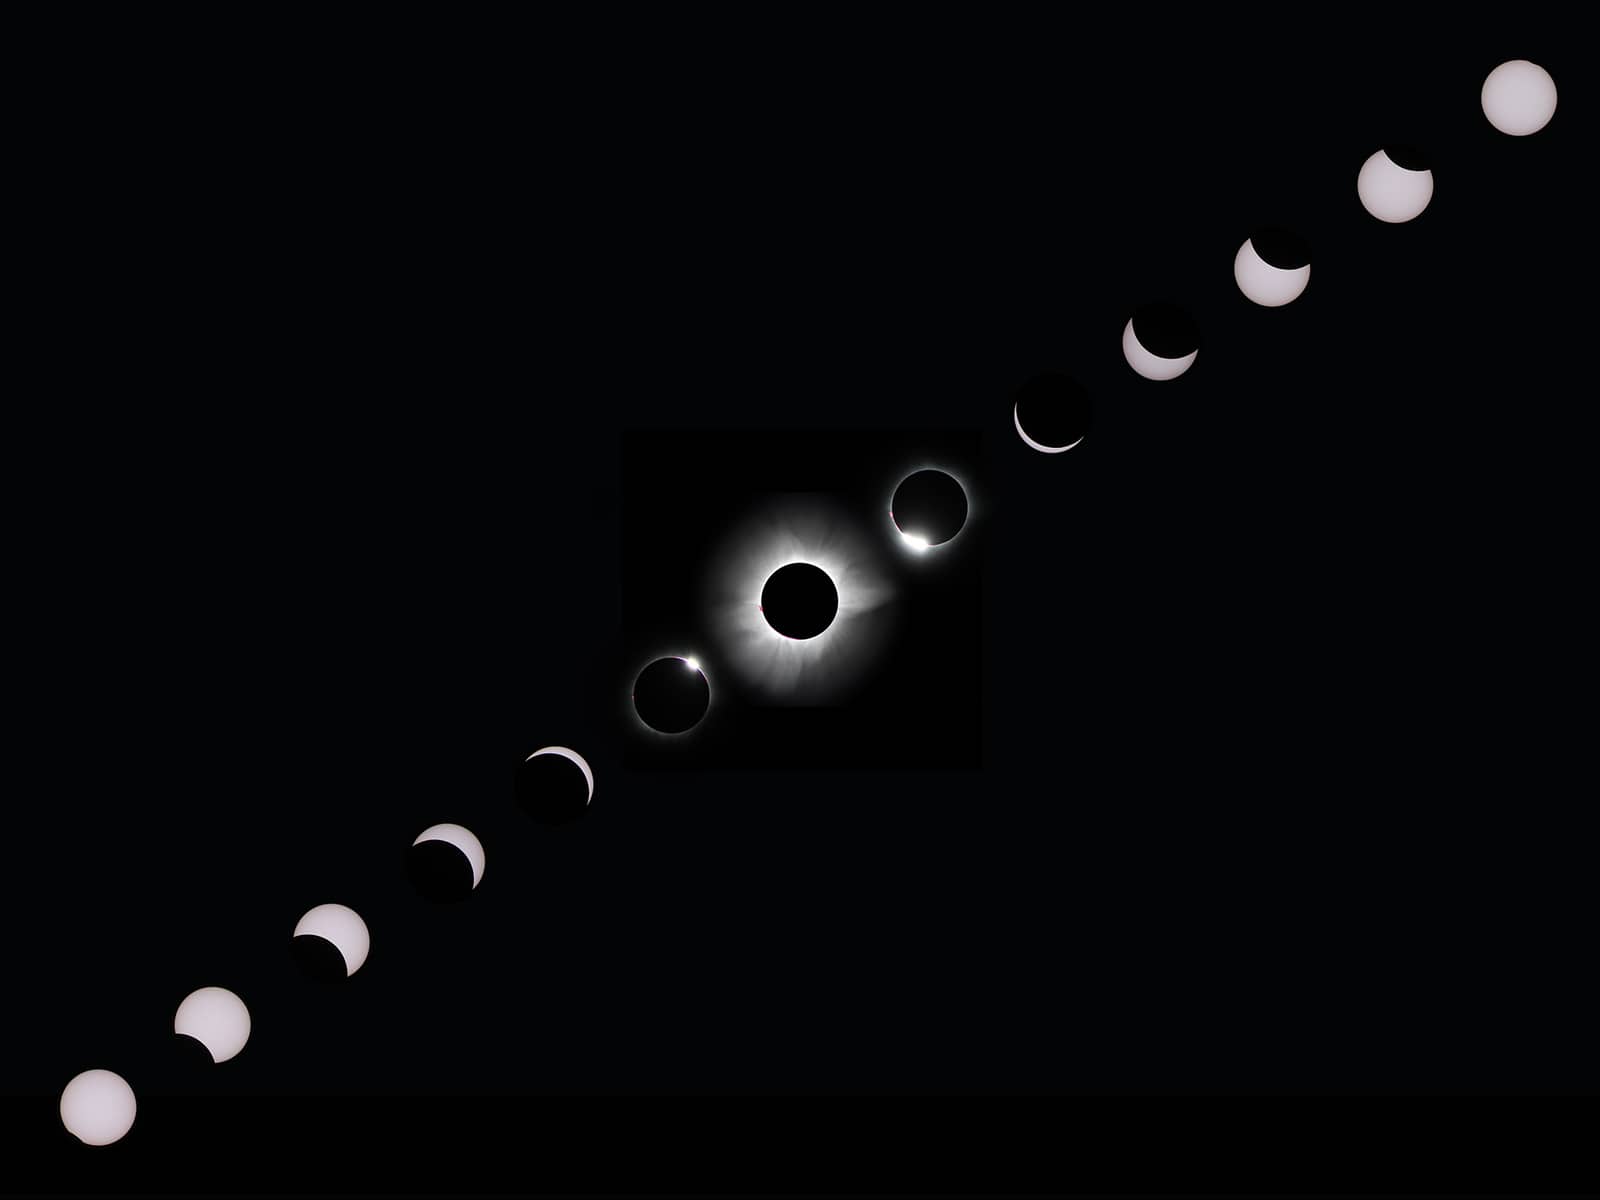 Solar eclipse sequence